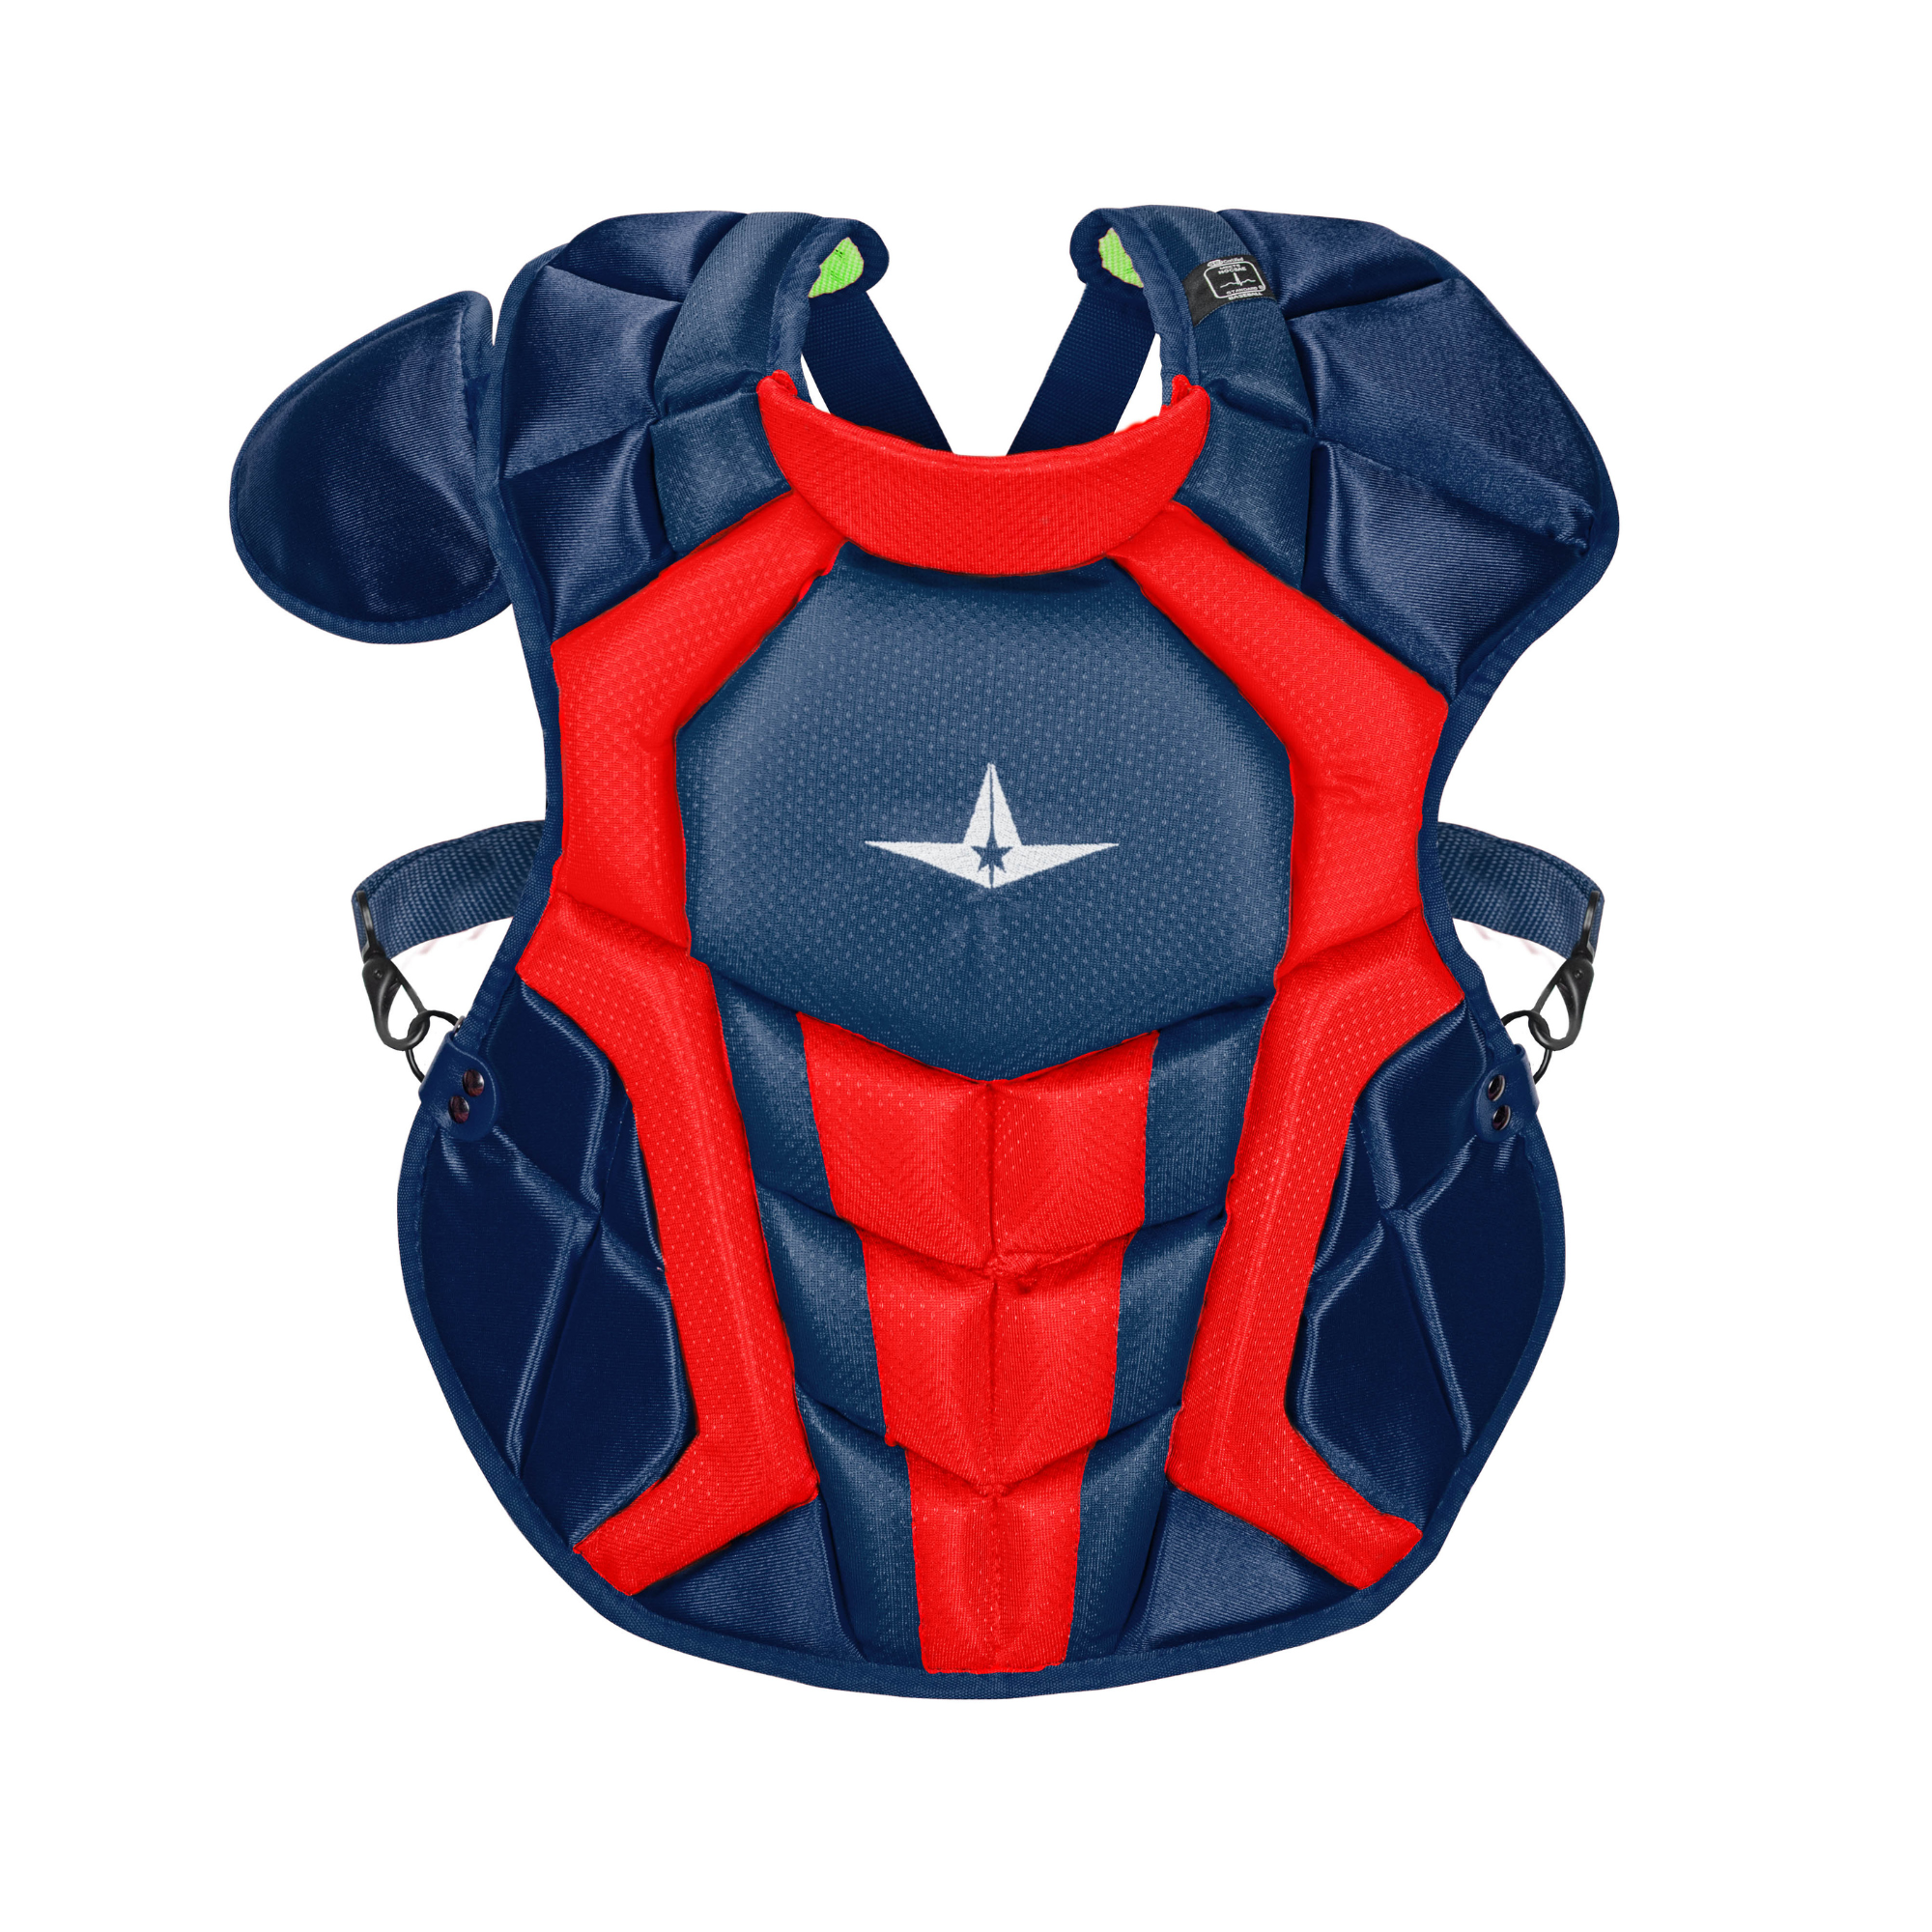 All-Star S7 AXIS Chest Protector / Two Tone / Ages 12-16